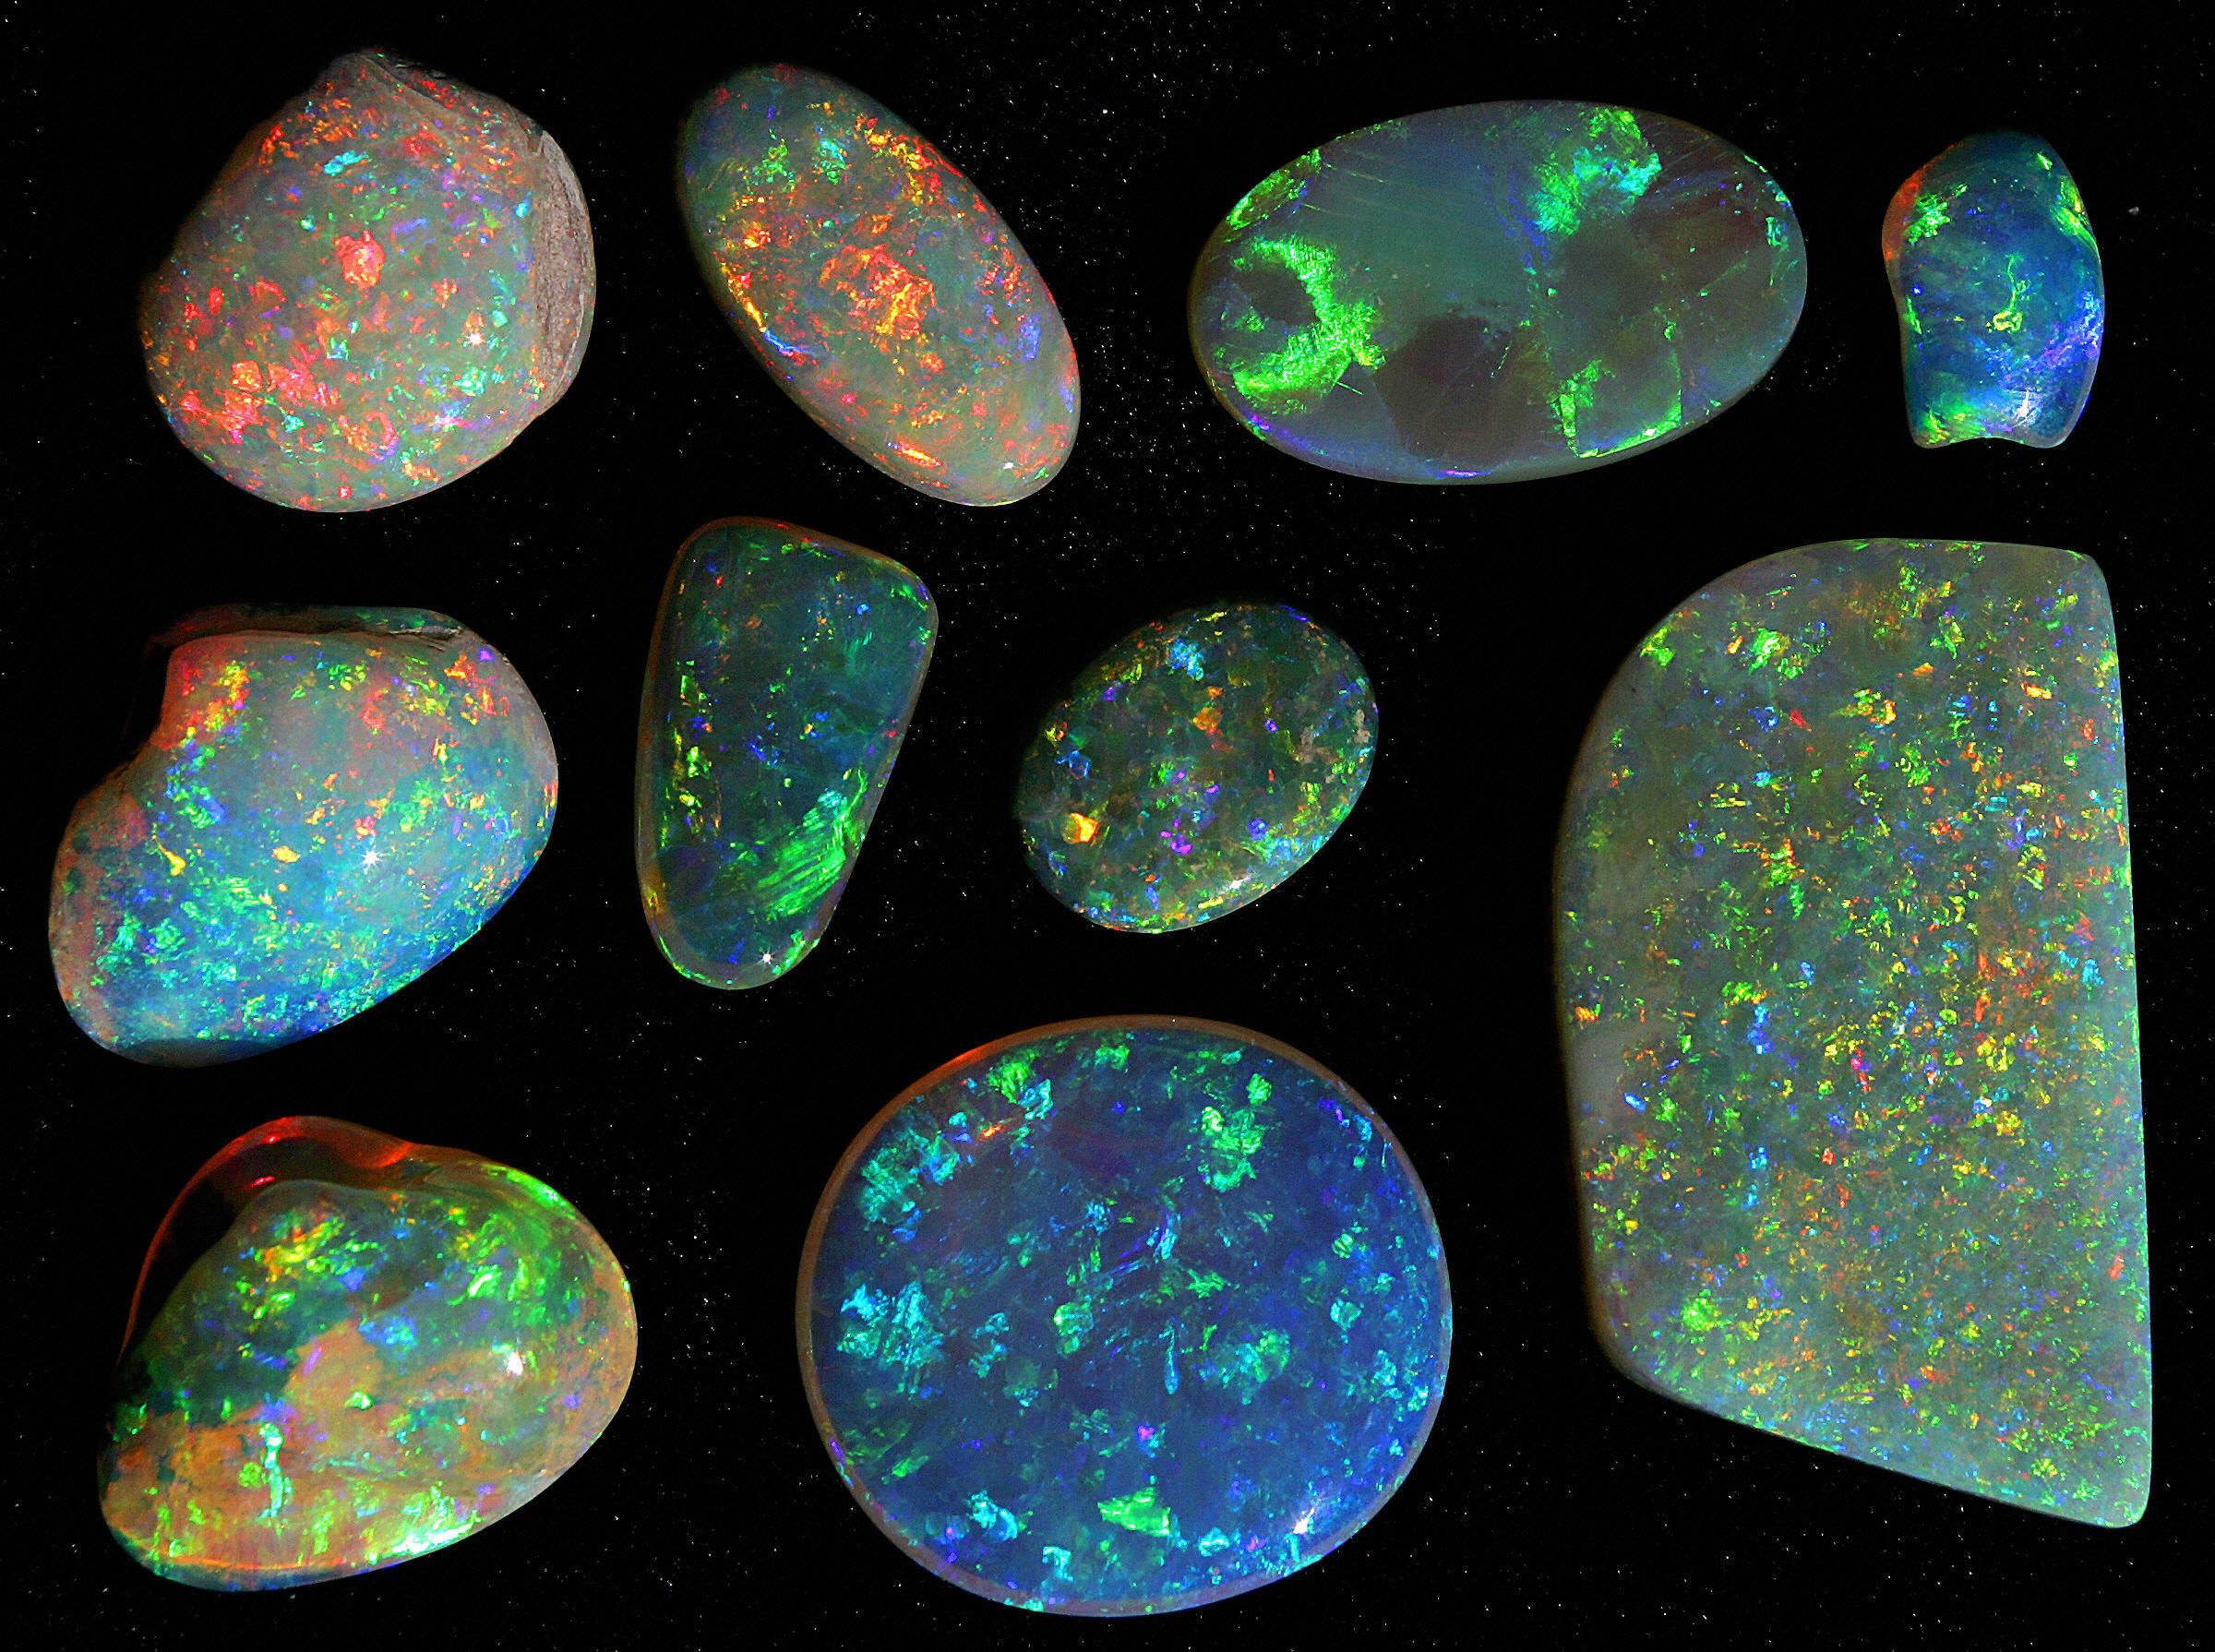 West Coast Choppers - “There are as many worlds as there are kinds of days,  and as an opal changes its colors and its fire to match the nature of a day